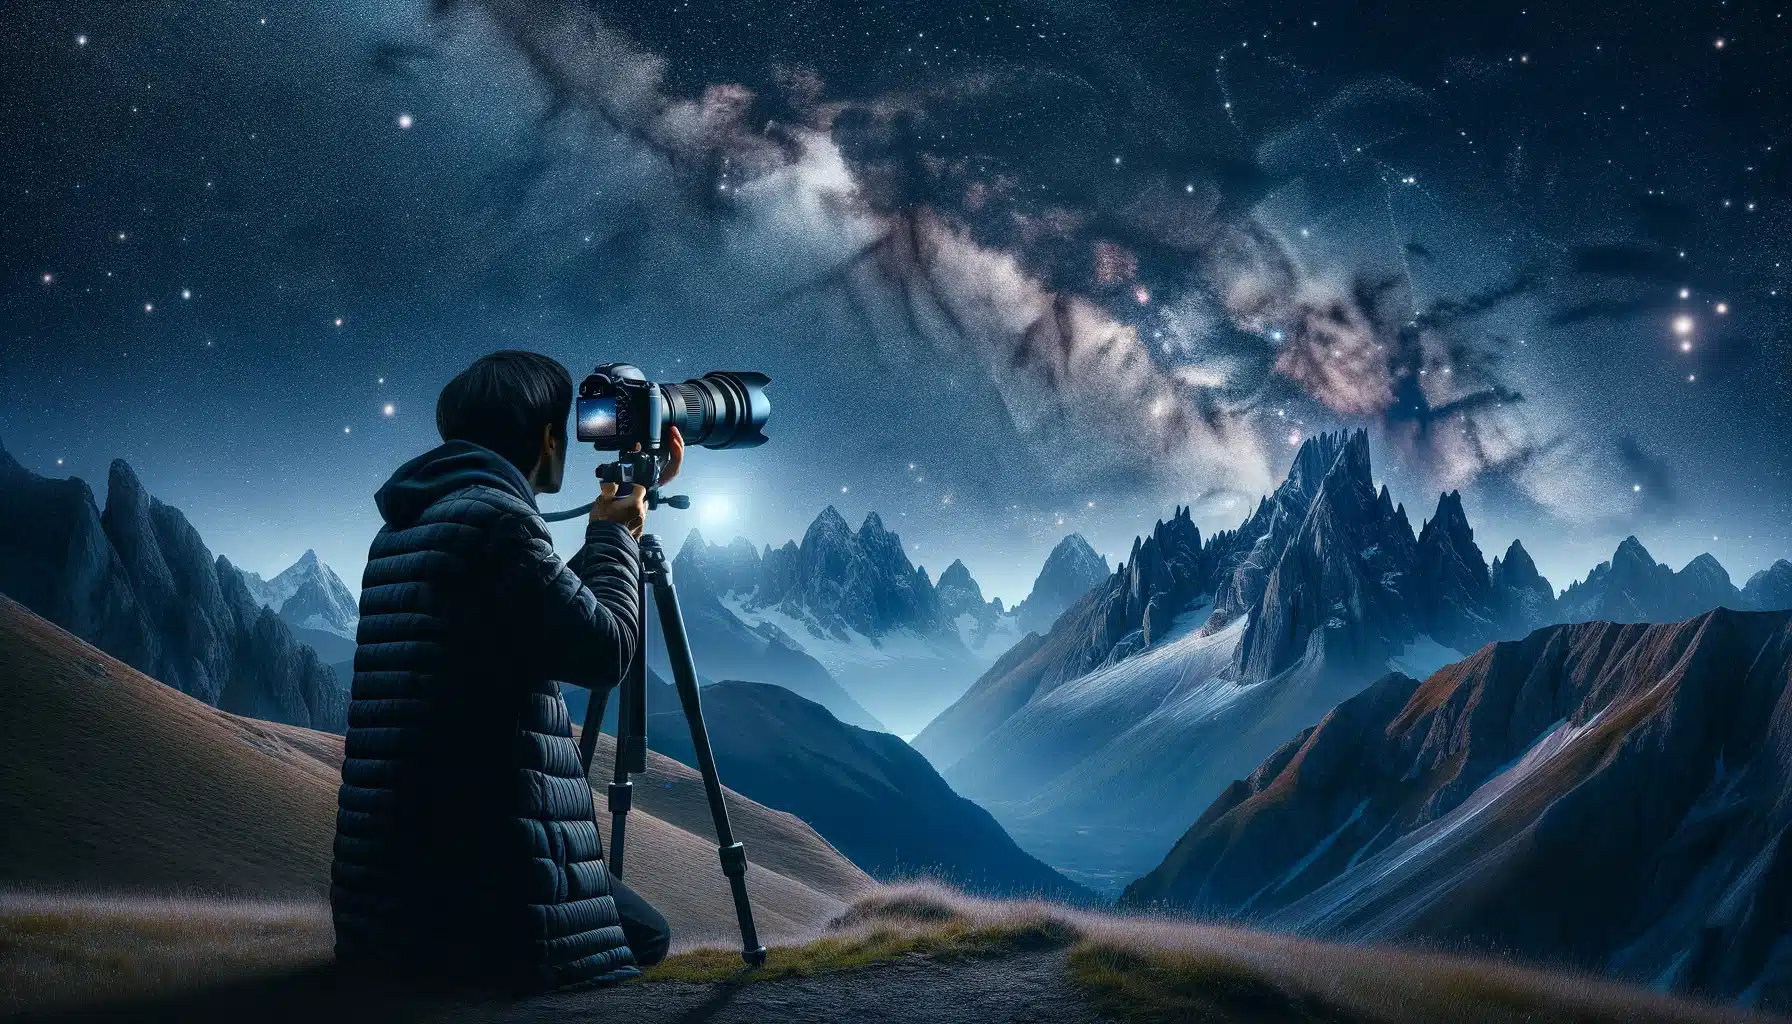 Photographer using a tripod-mounted camera at night in the mountains for astrophotography, capturing the expansive starry sky above.